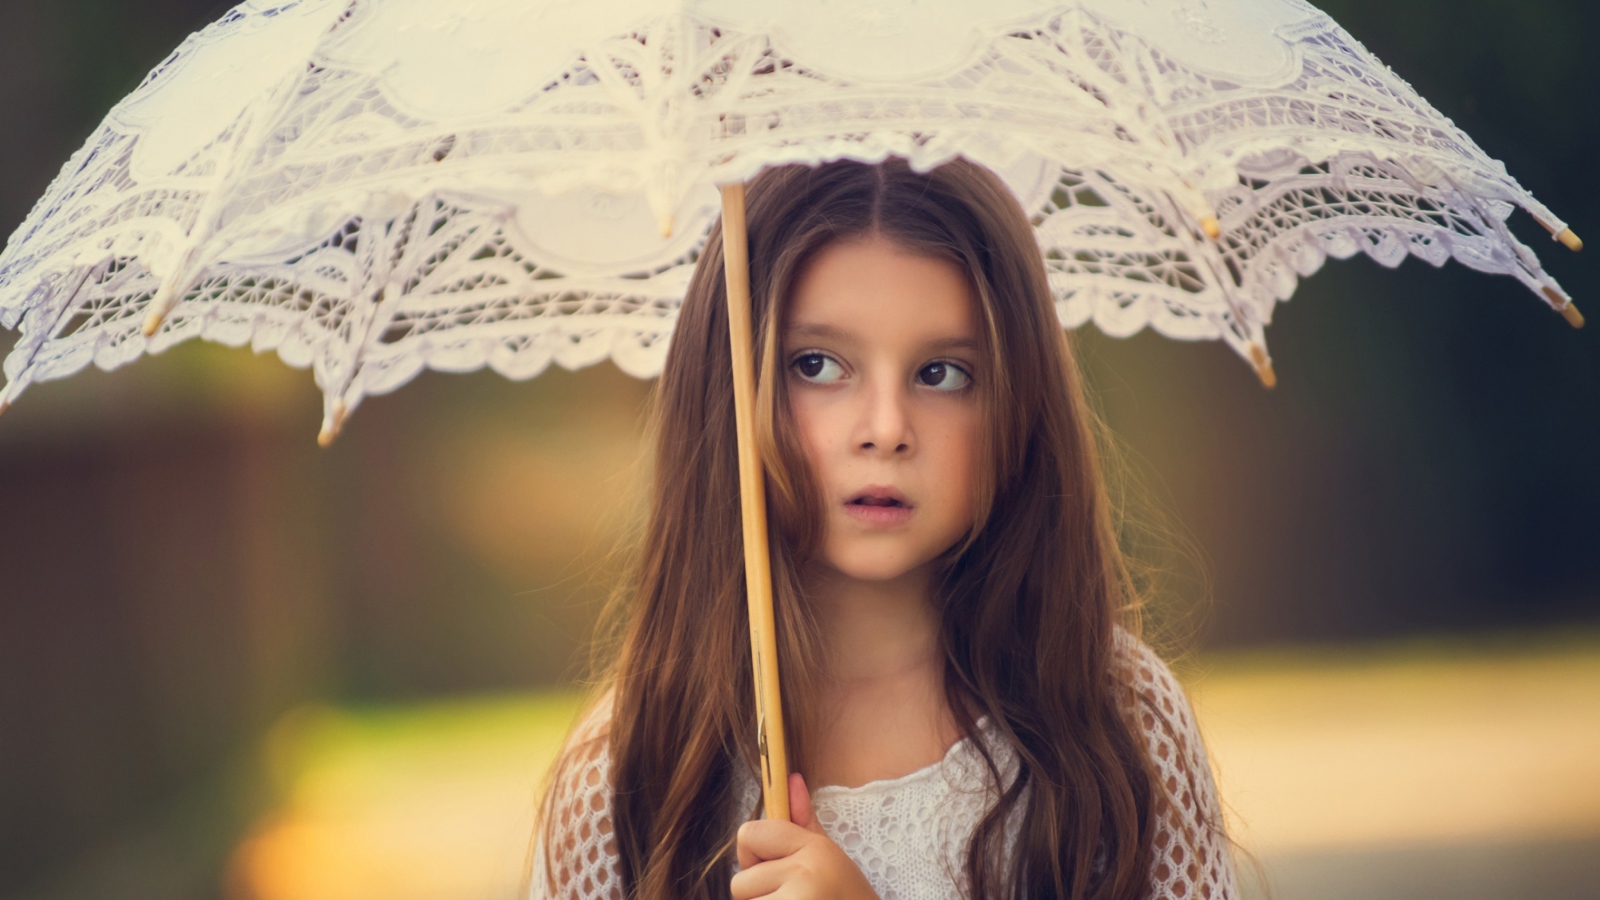 Girl With Lace Umbrella wallpaper 1600x900